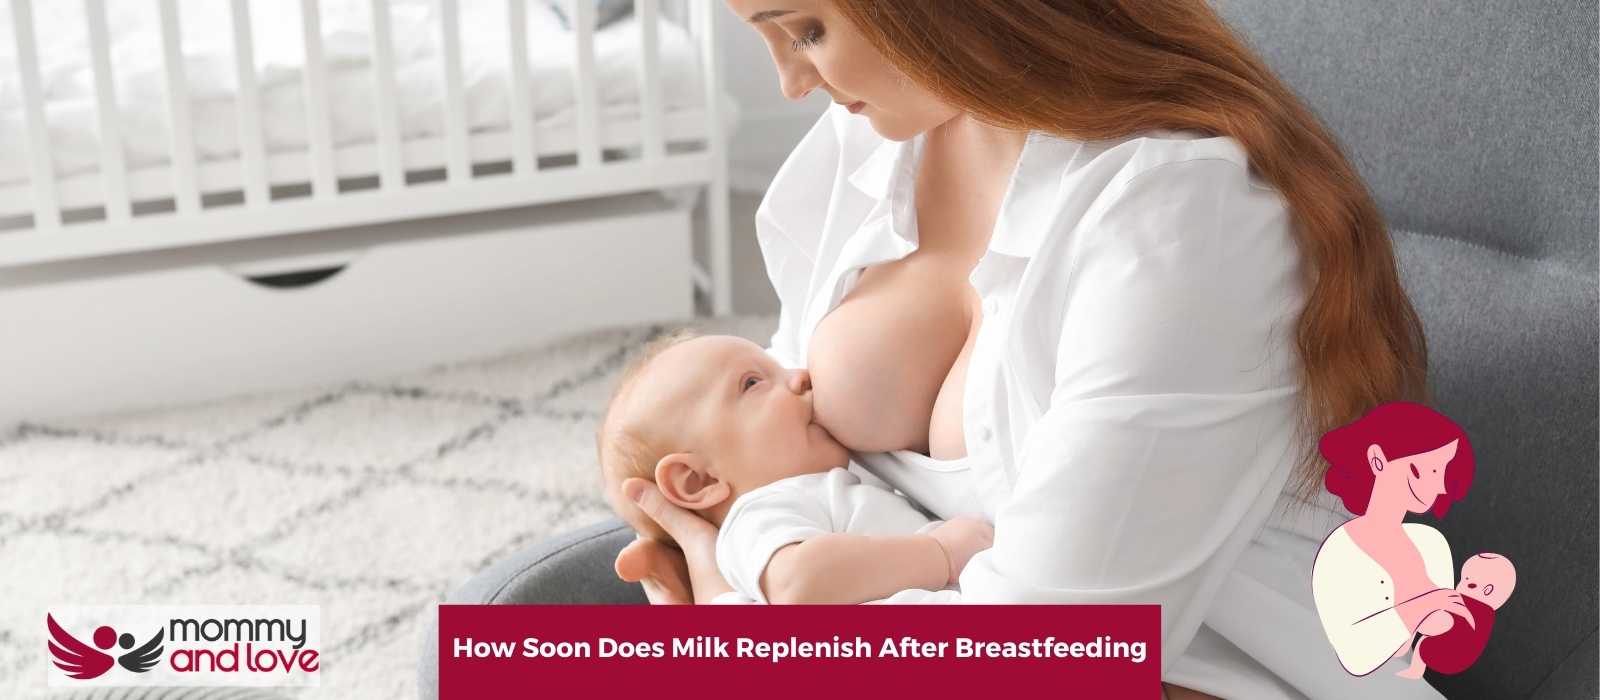 How Soon Does Milk Replenish After Breastfeeding